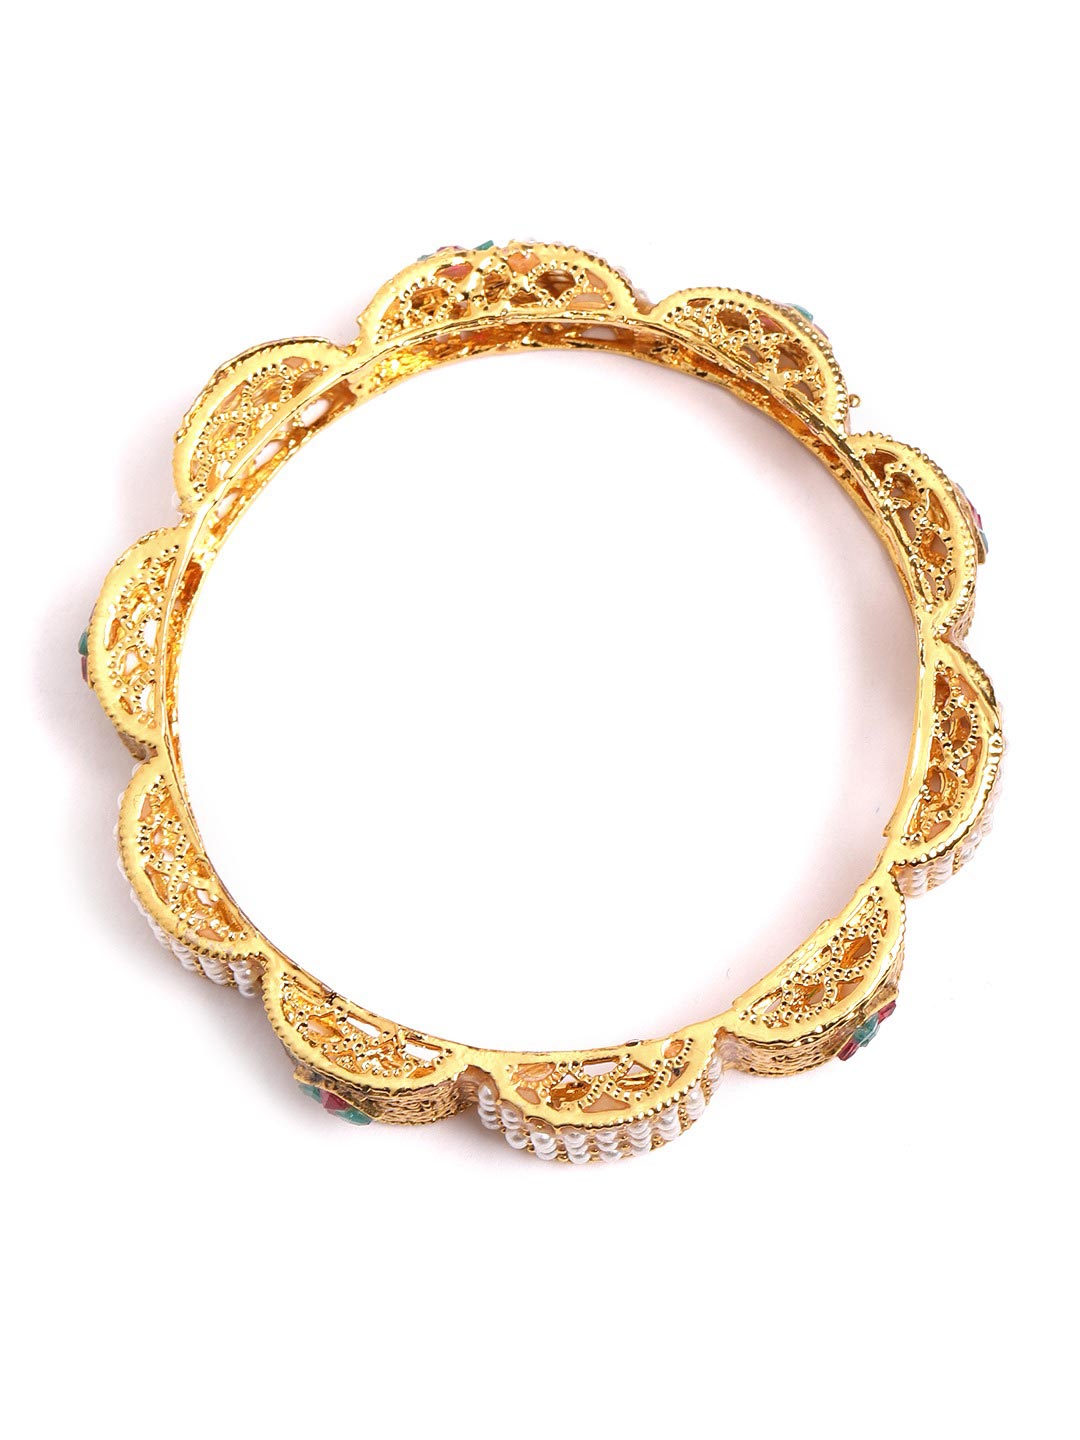 Set of 2 Gold Plated Ruby and Emerald Studded Bangles